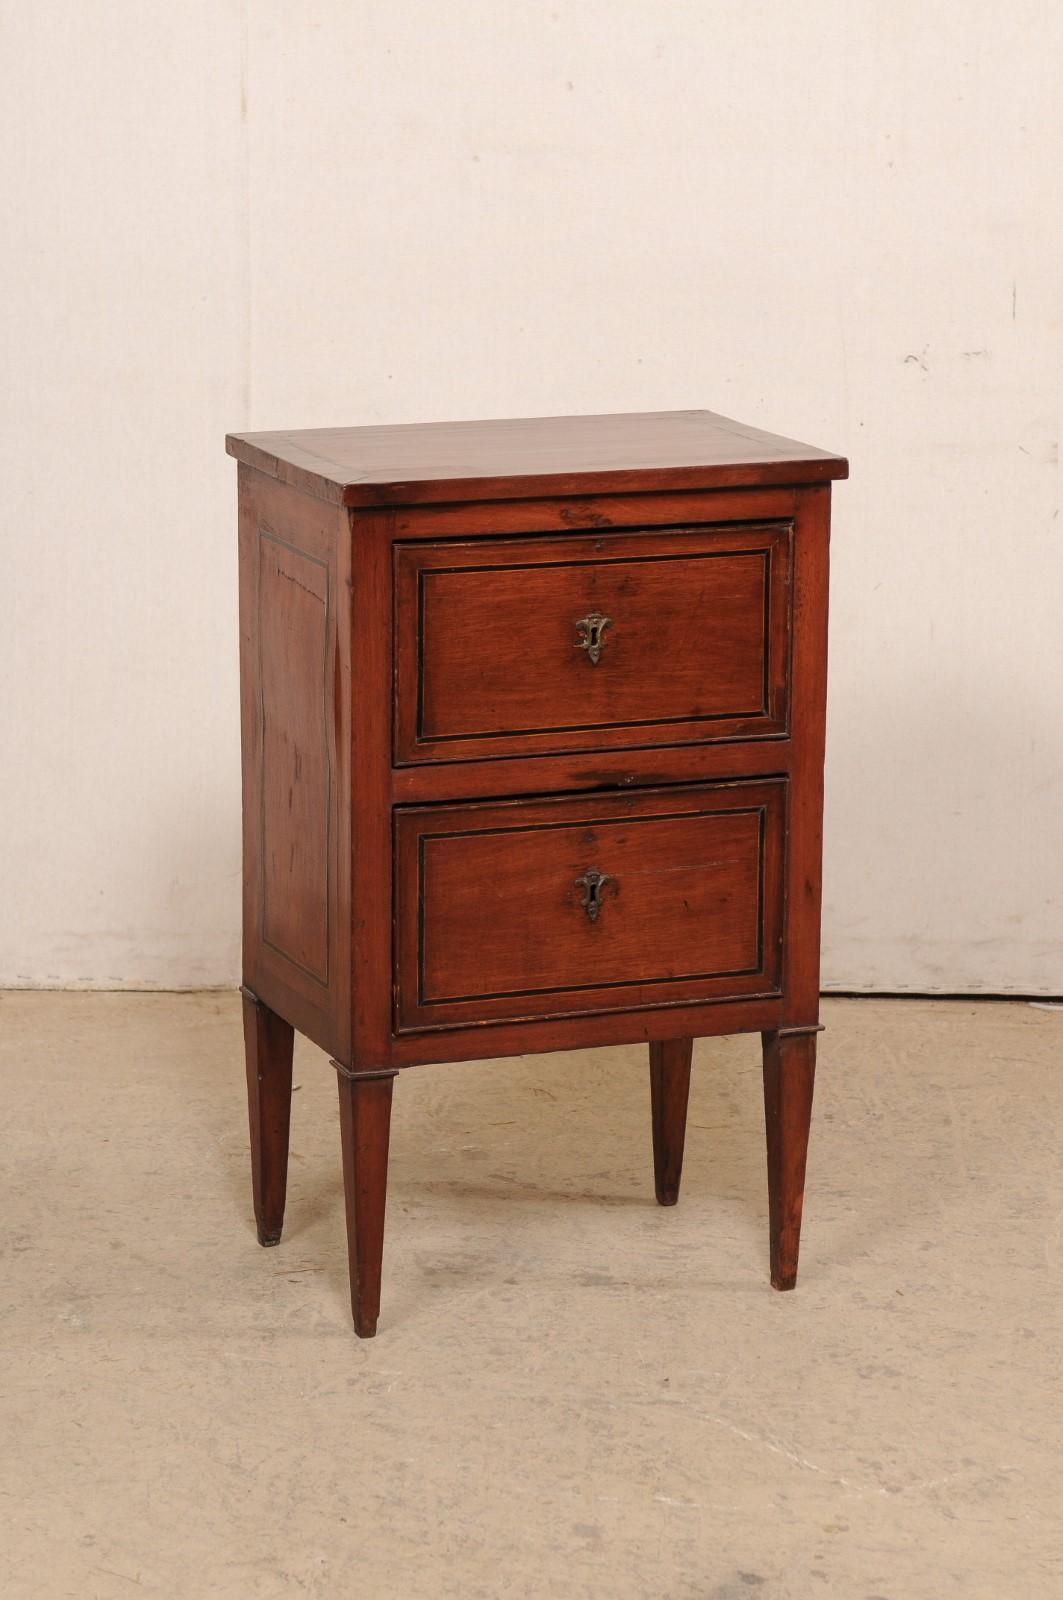 An Italian two-drawer raised chest with inlay accents from the 19th century. This antique side chest or end-table from Italy features nice clean lines, allowing the linear outlining of the inlay trimming about the top, drawers, and sides to speak